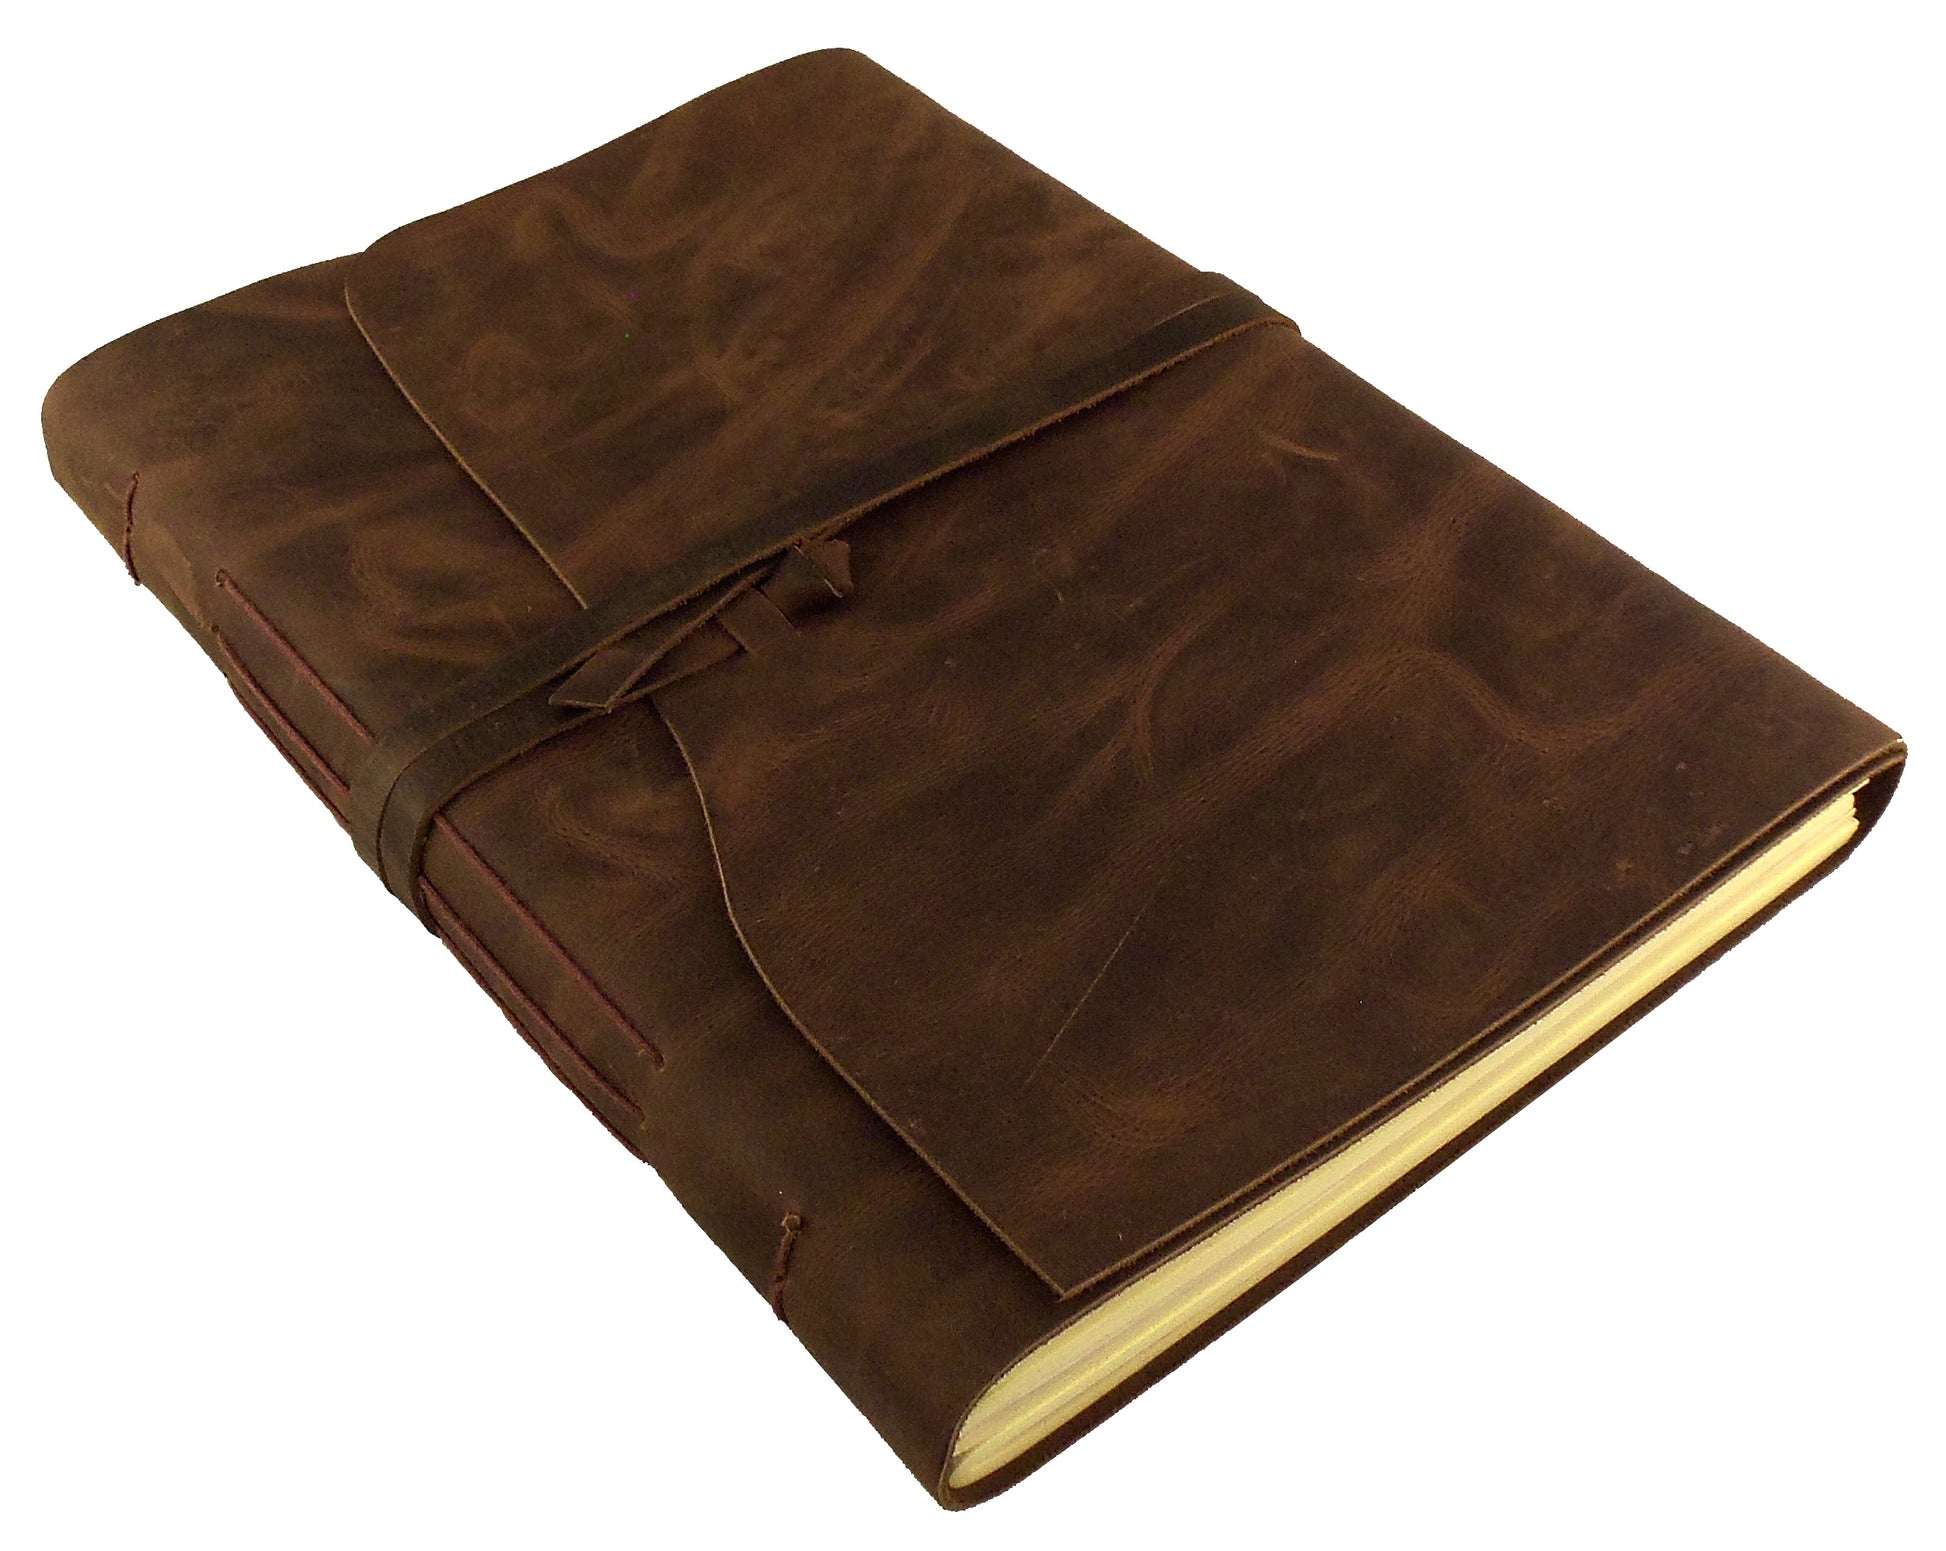 Leather Sketchbook / Refillable Notebook / Drawing Journal / Made